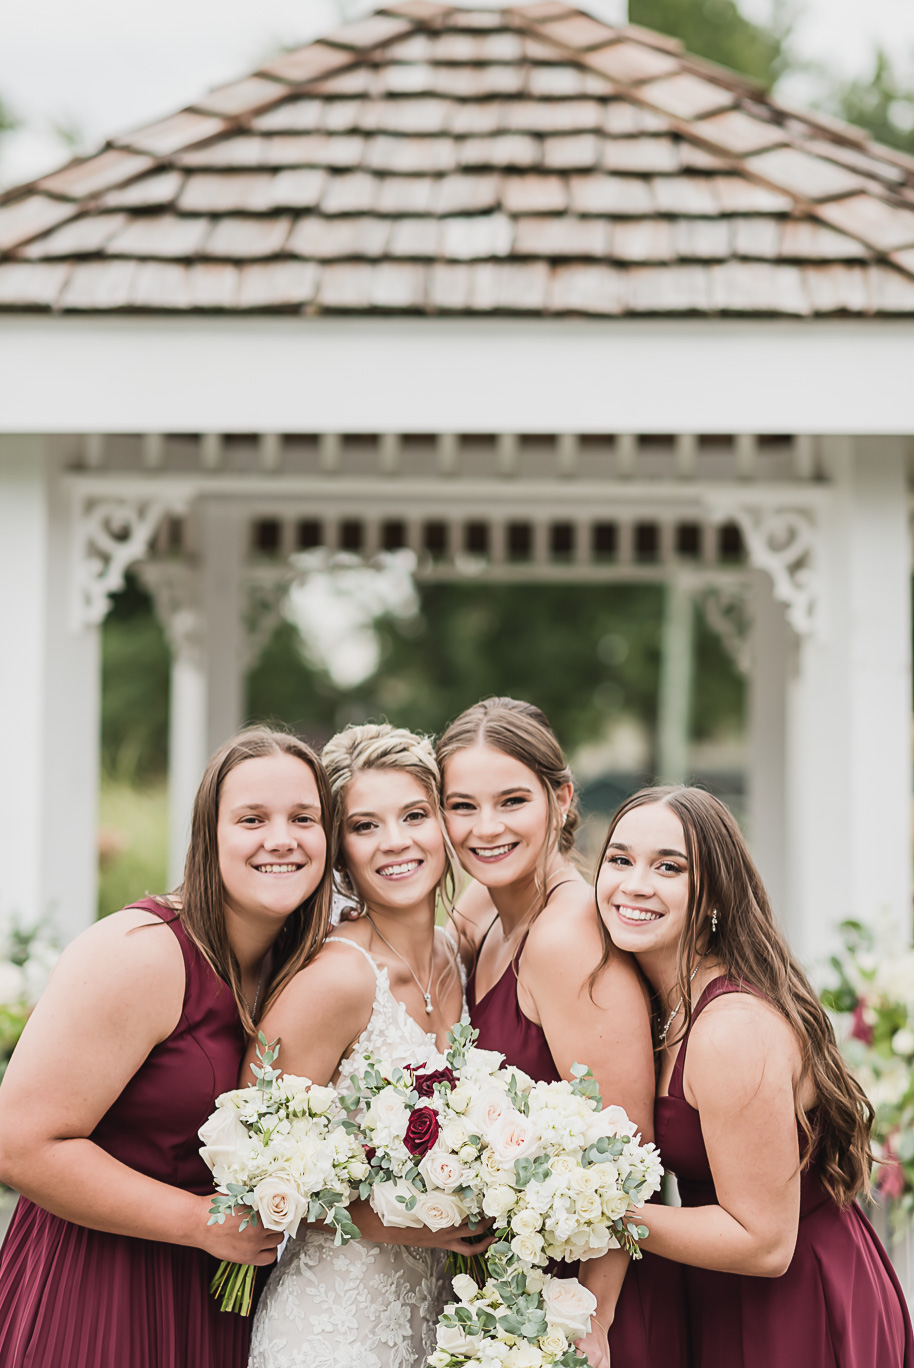 A navy and cranberry fall Lapeer Country Club wedding in Lapeer, Michigan provided by Kari Dawson, top-rated Northern Michigan wedding photographer, and her team.